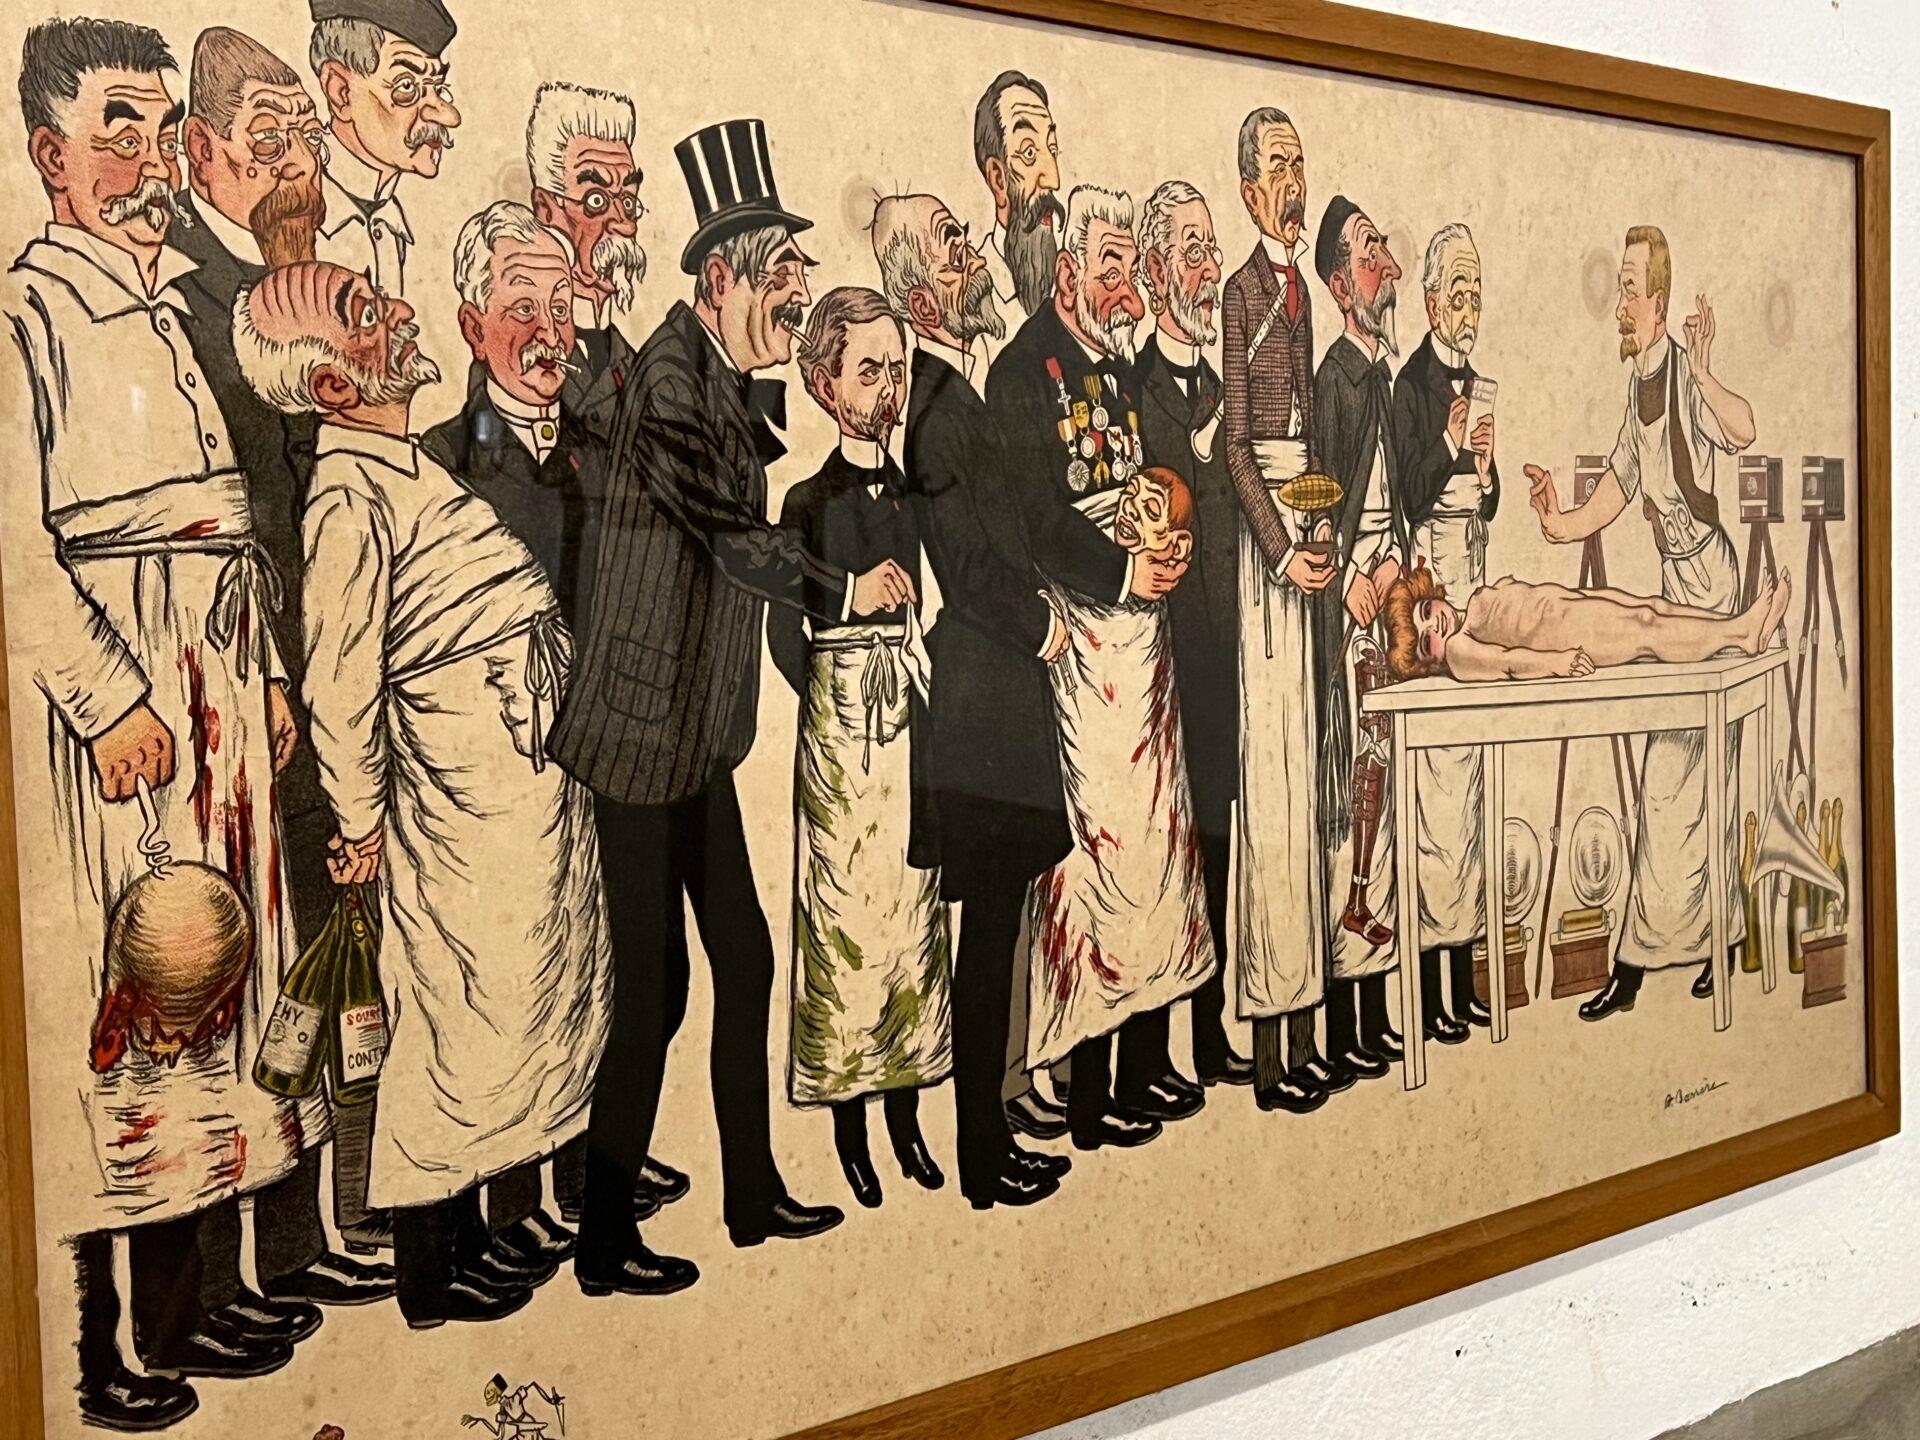 Rare large antique lithographs by the famous French artist Adrien Barrère (1874-1913). This diptych is a caricature from 1904 of the professors of the medical faculty of the University of Paris. Super cool. The originals hang in the University of